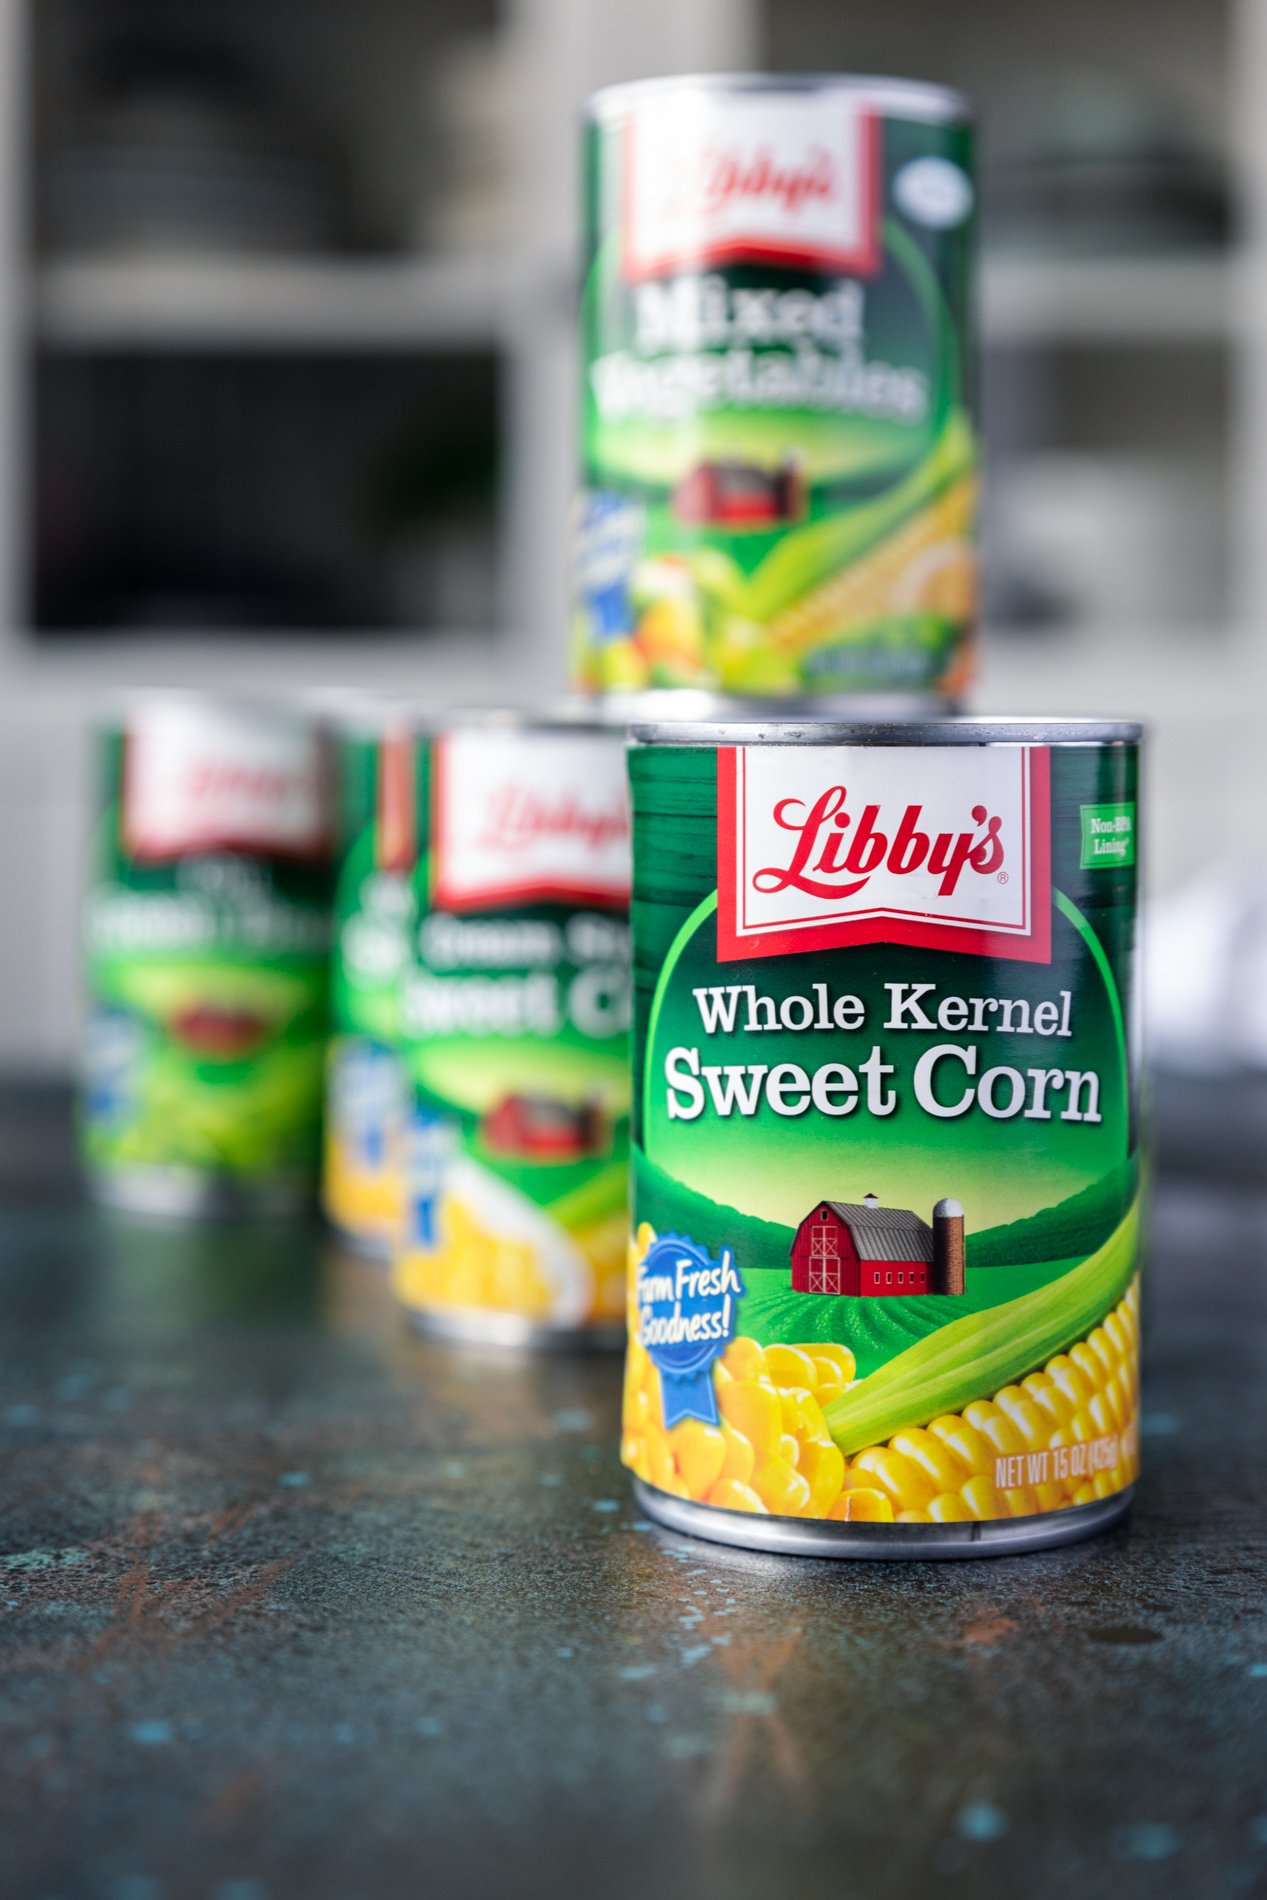 a straight-forward shot of canned vegetables, with a can of corn in sharp focus in front and several blurred cans behind it, one of which is stacked.